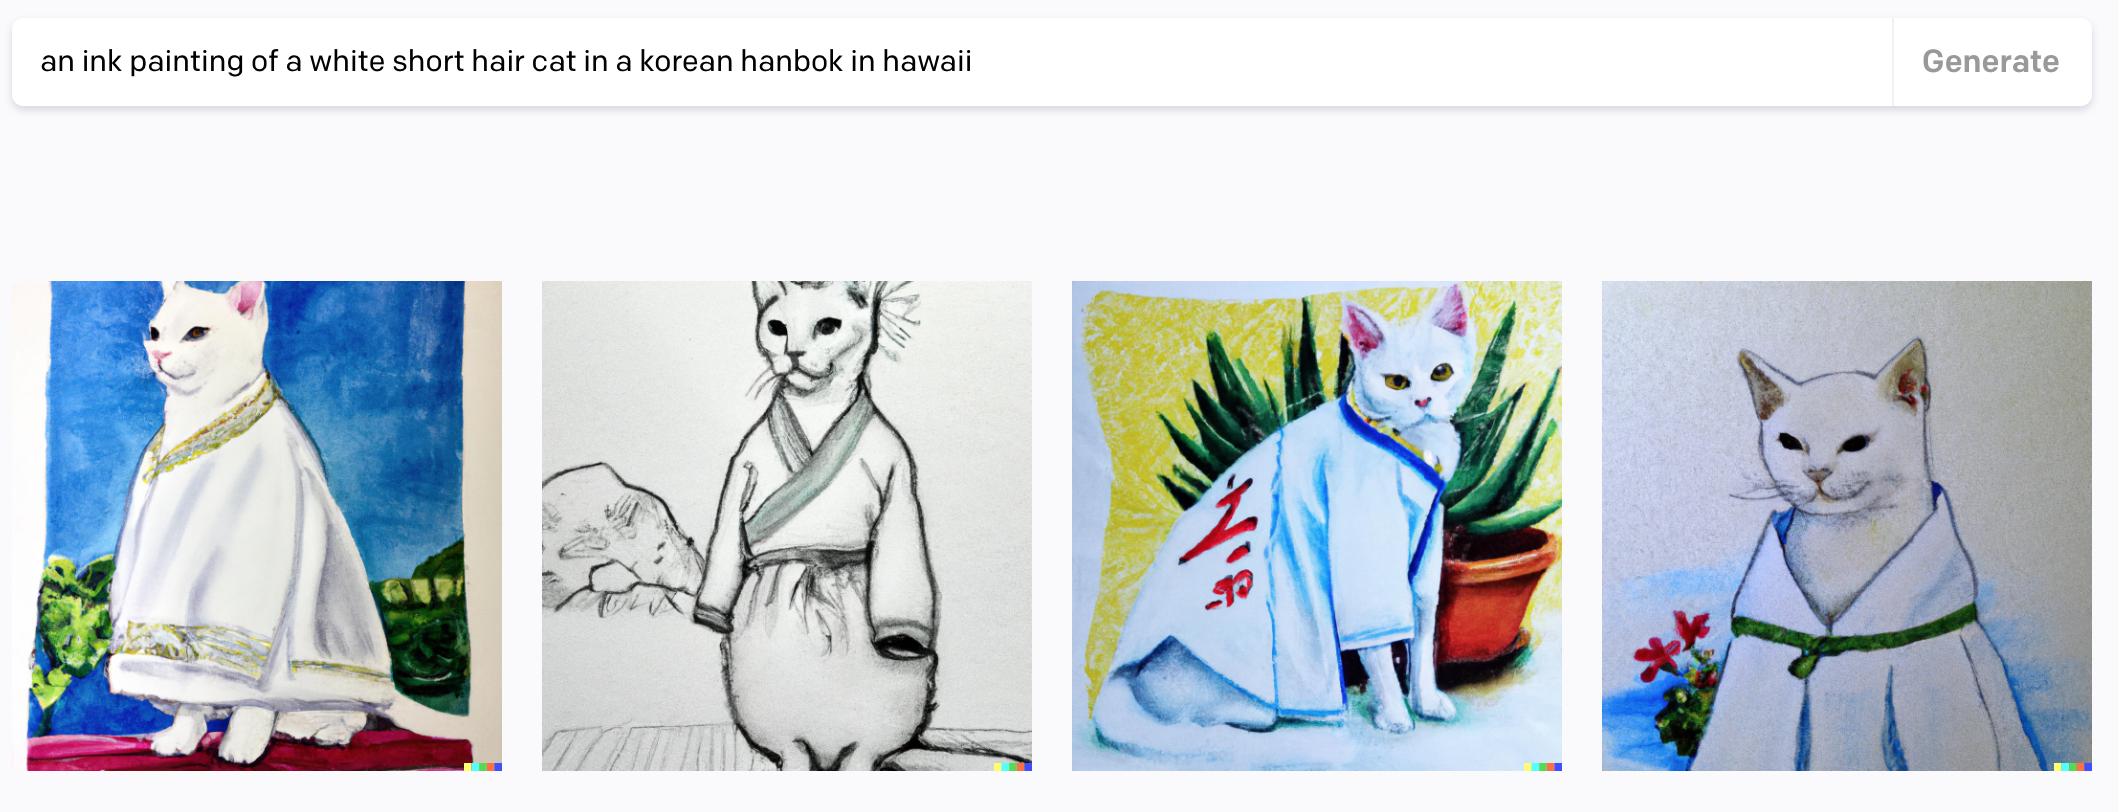 an-ink-painting-of-a-white-short-hair-cat-in-a-korean-hanbok-in-hawaii